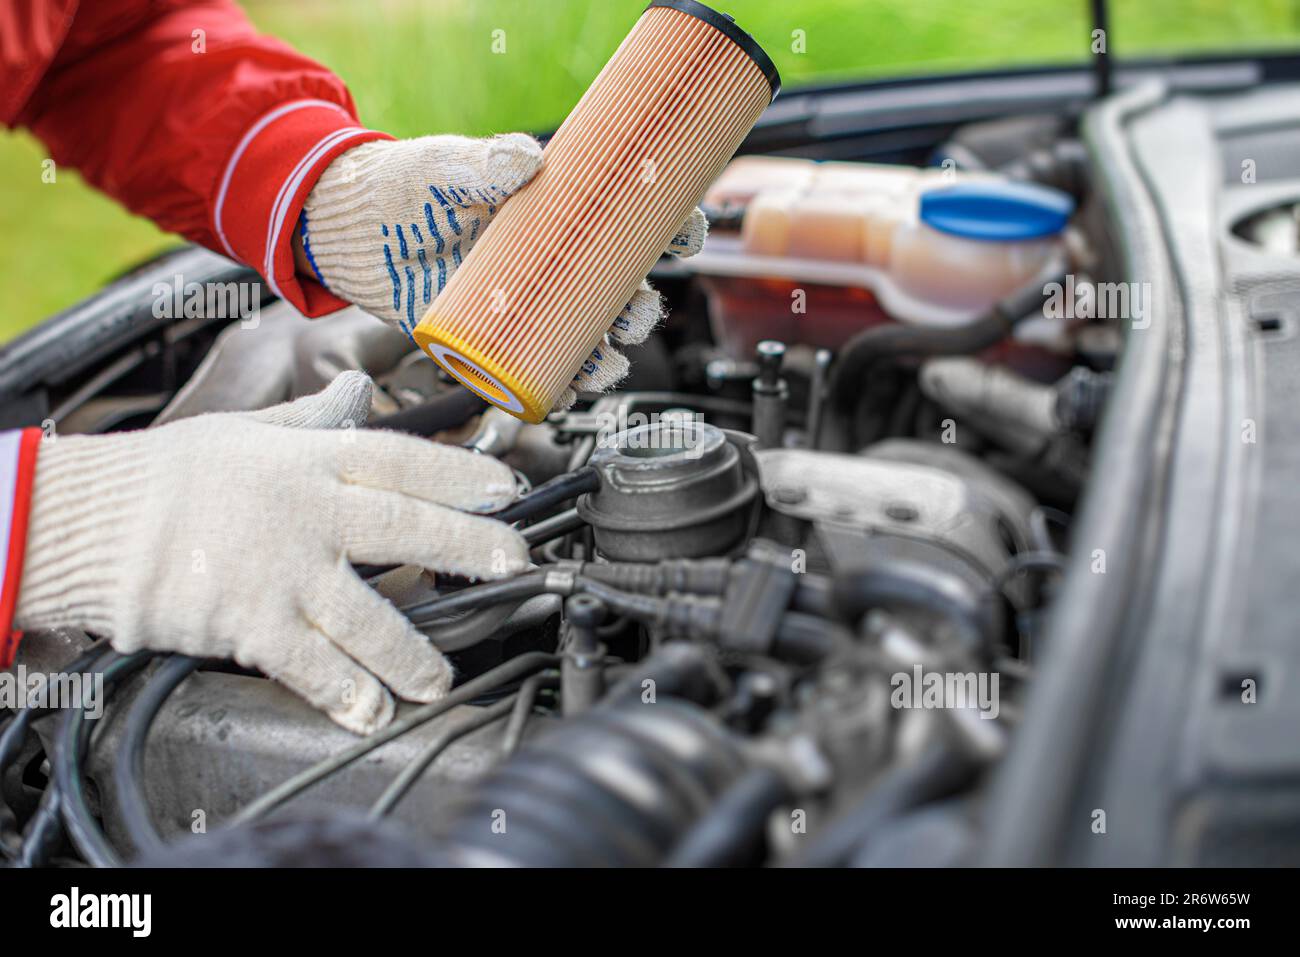 Change the filter on the car engine during vehicle maintenance. Stock Photo